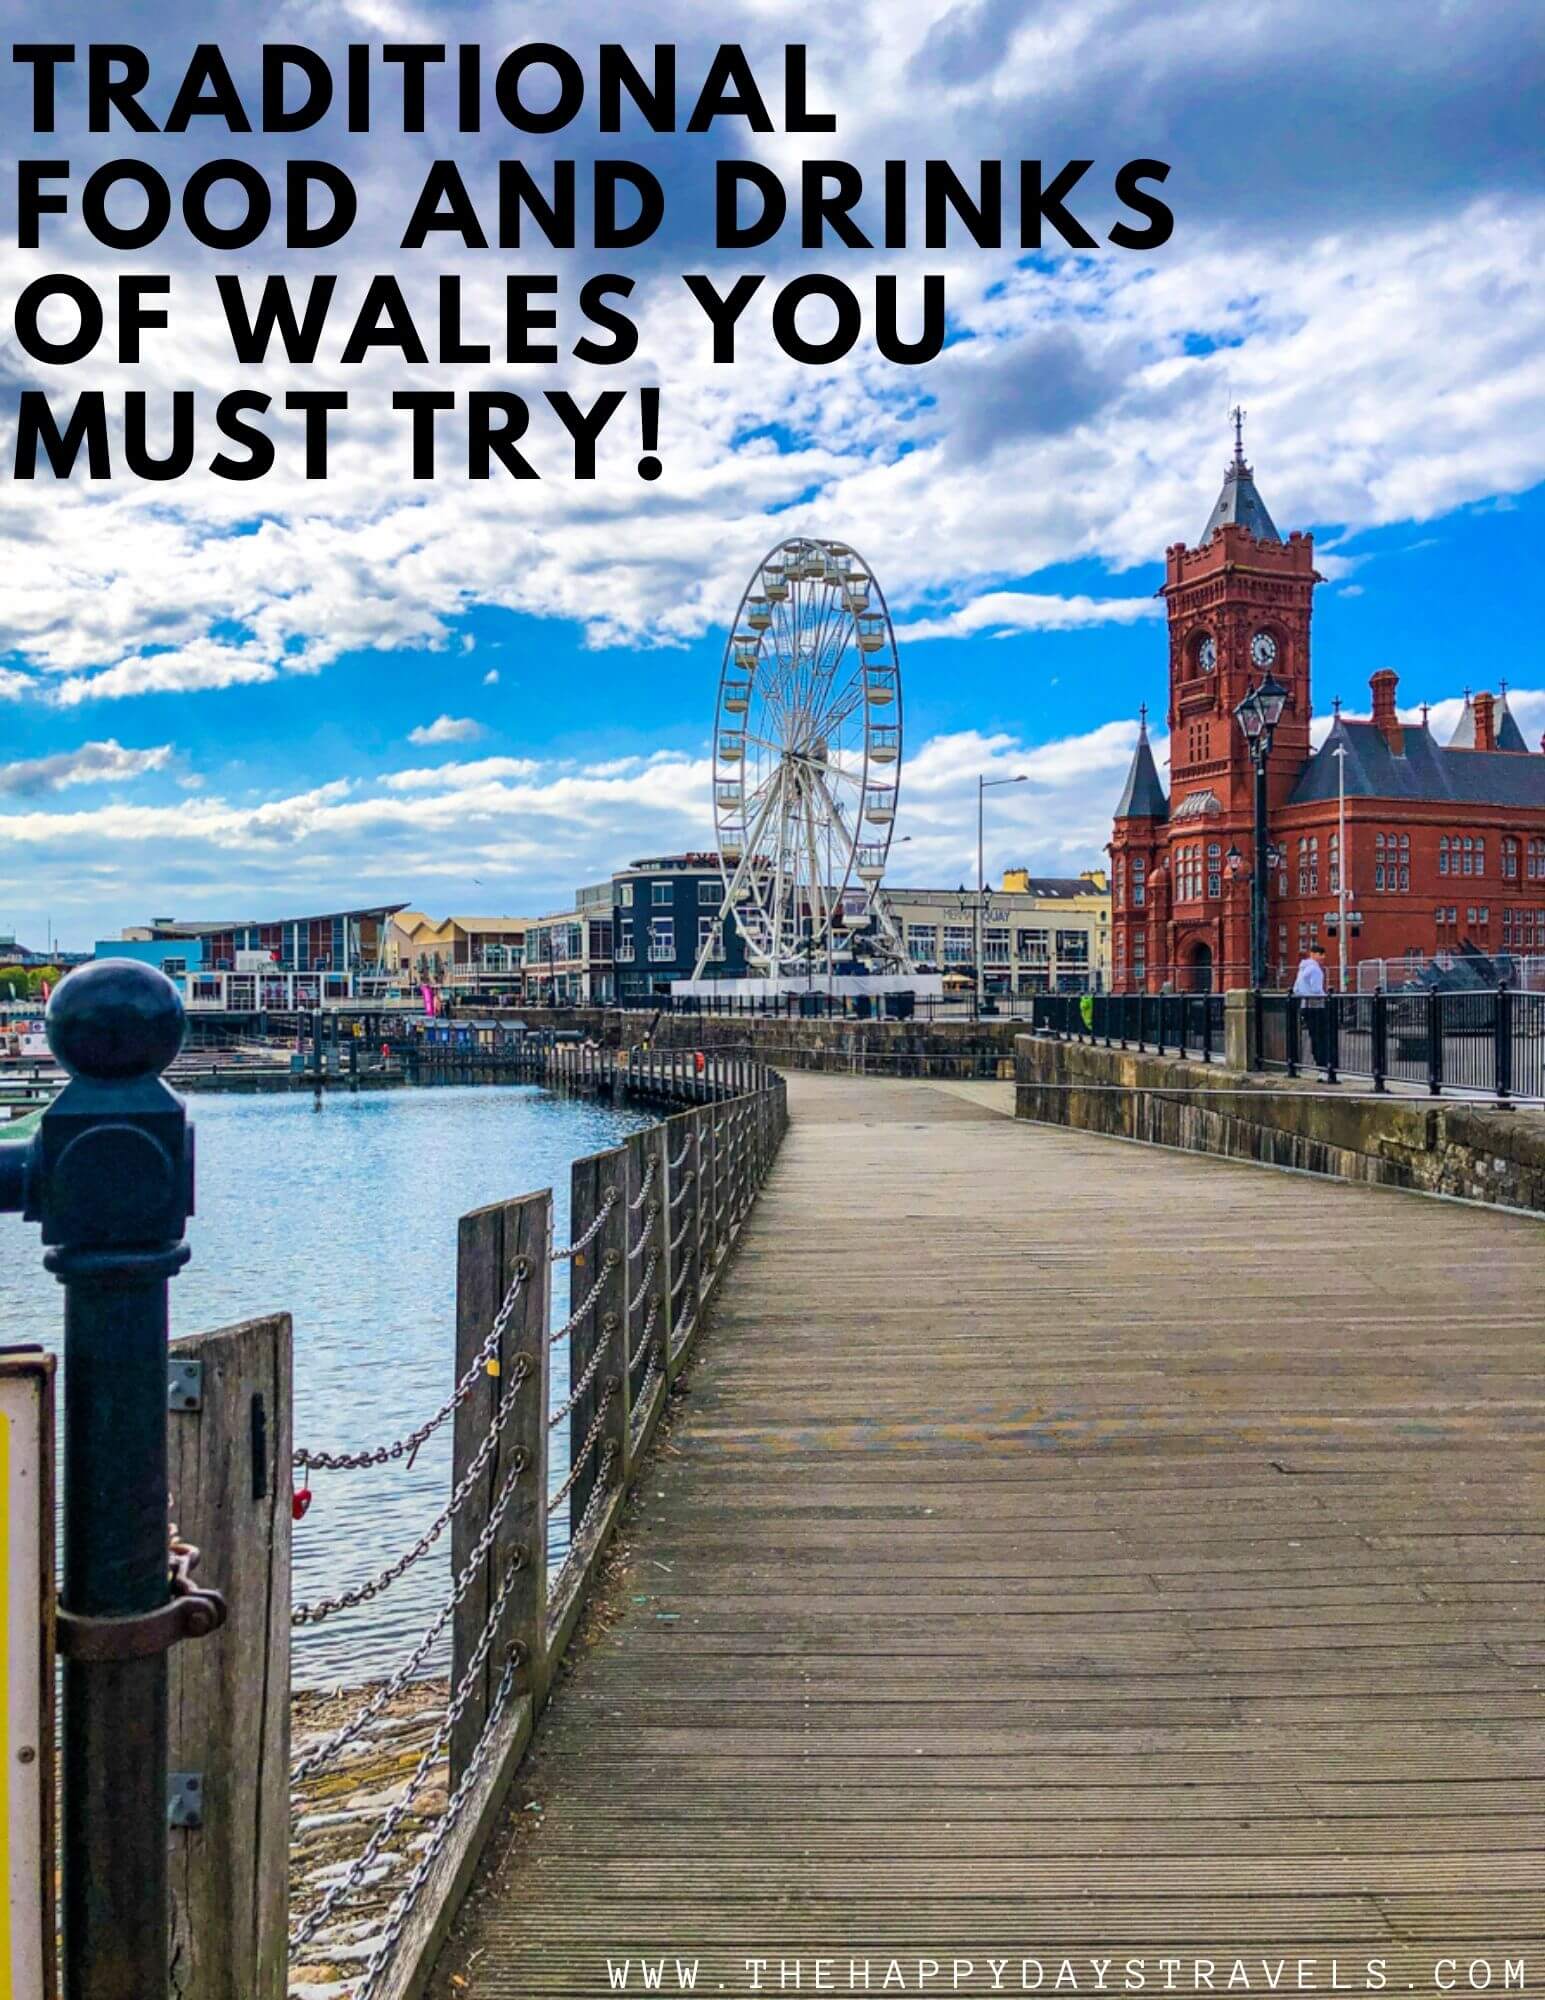 Pin Image of Cardiff Bay with black text in left top corner saying 'Traditional Food and Drinks of Wales You Must Try!'. Blog URL at bottom right.